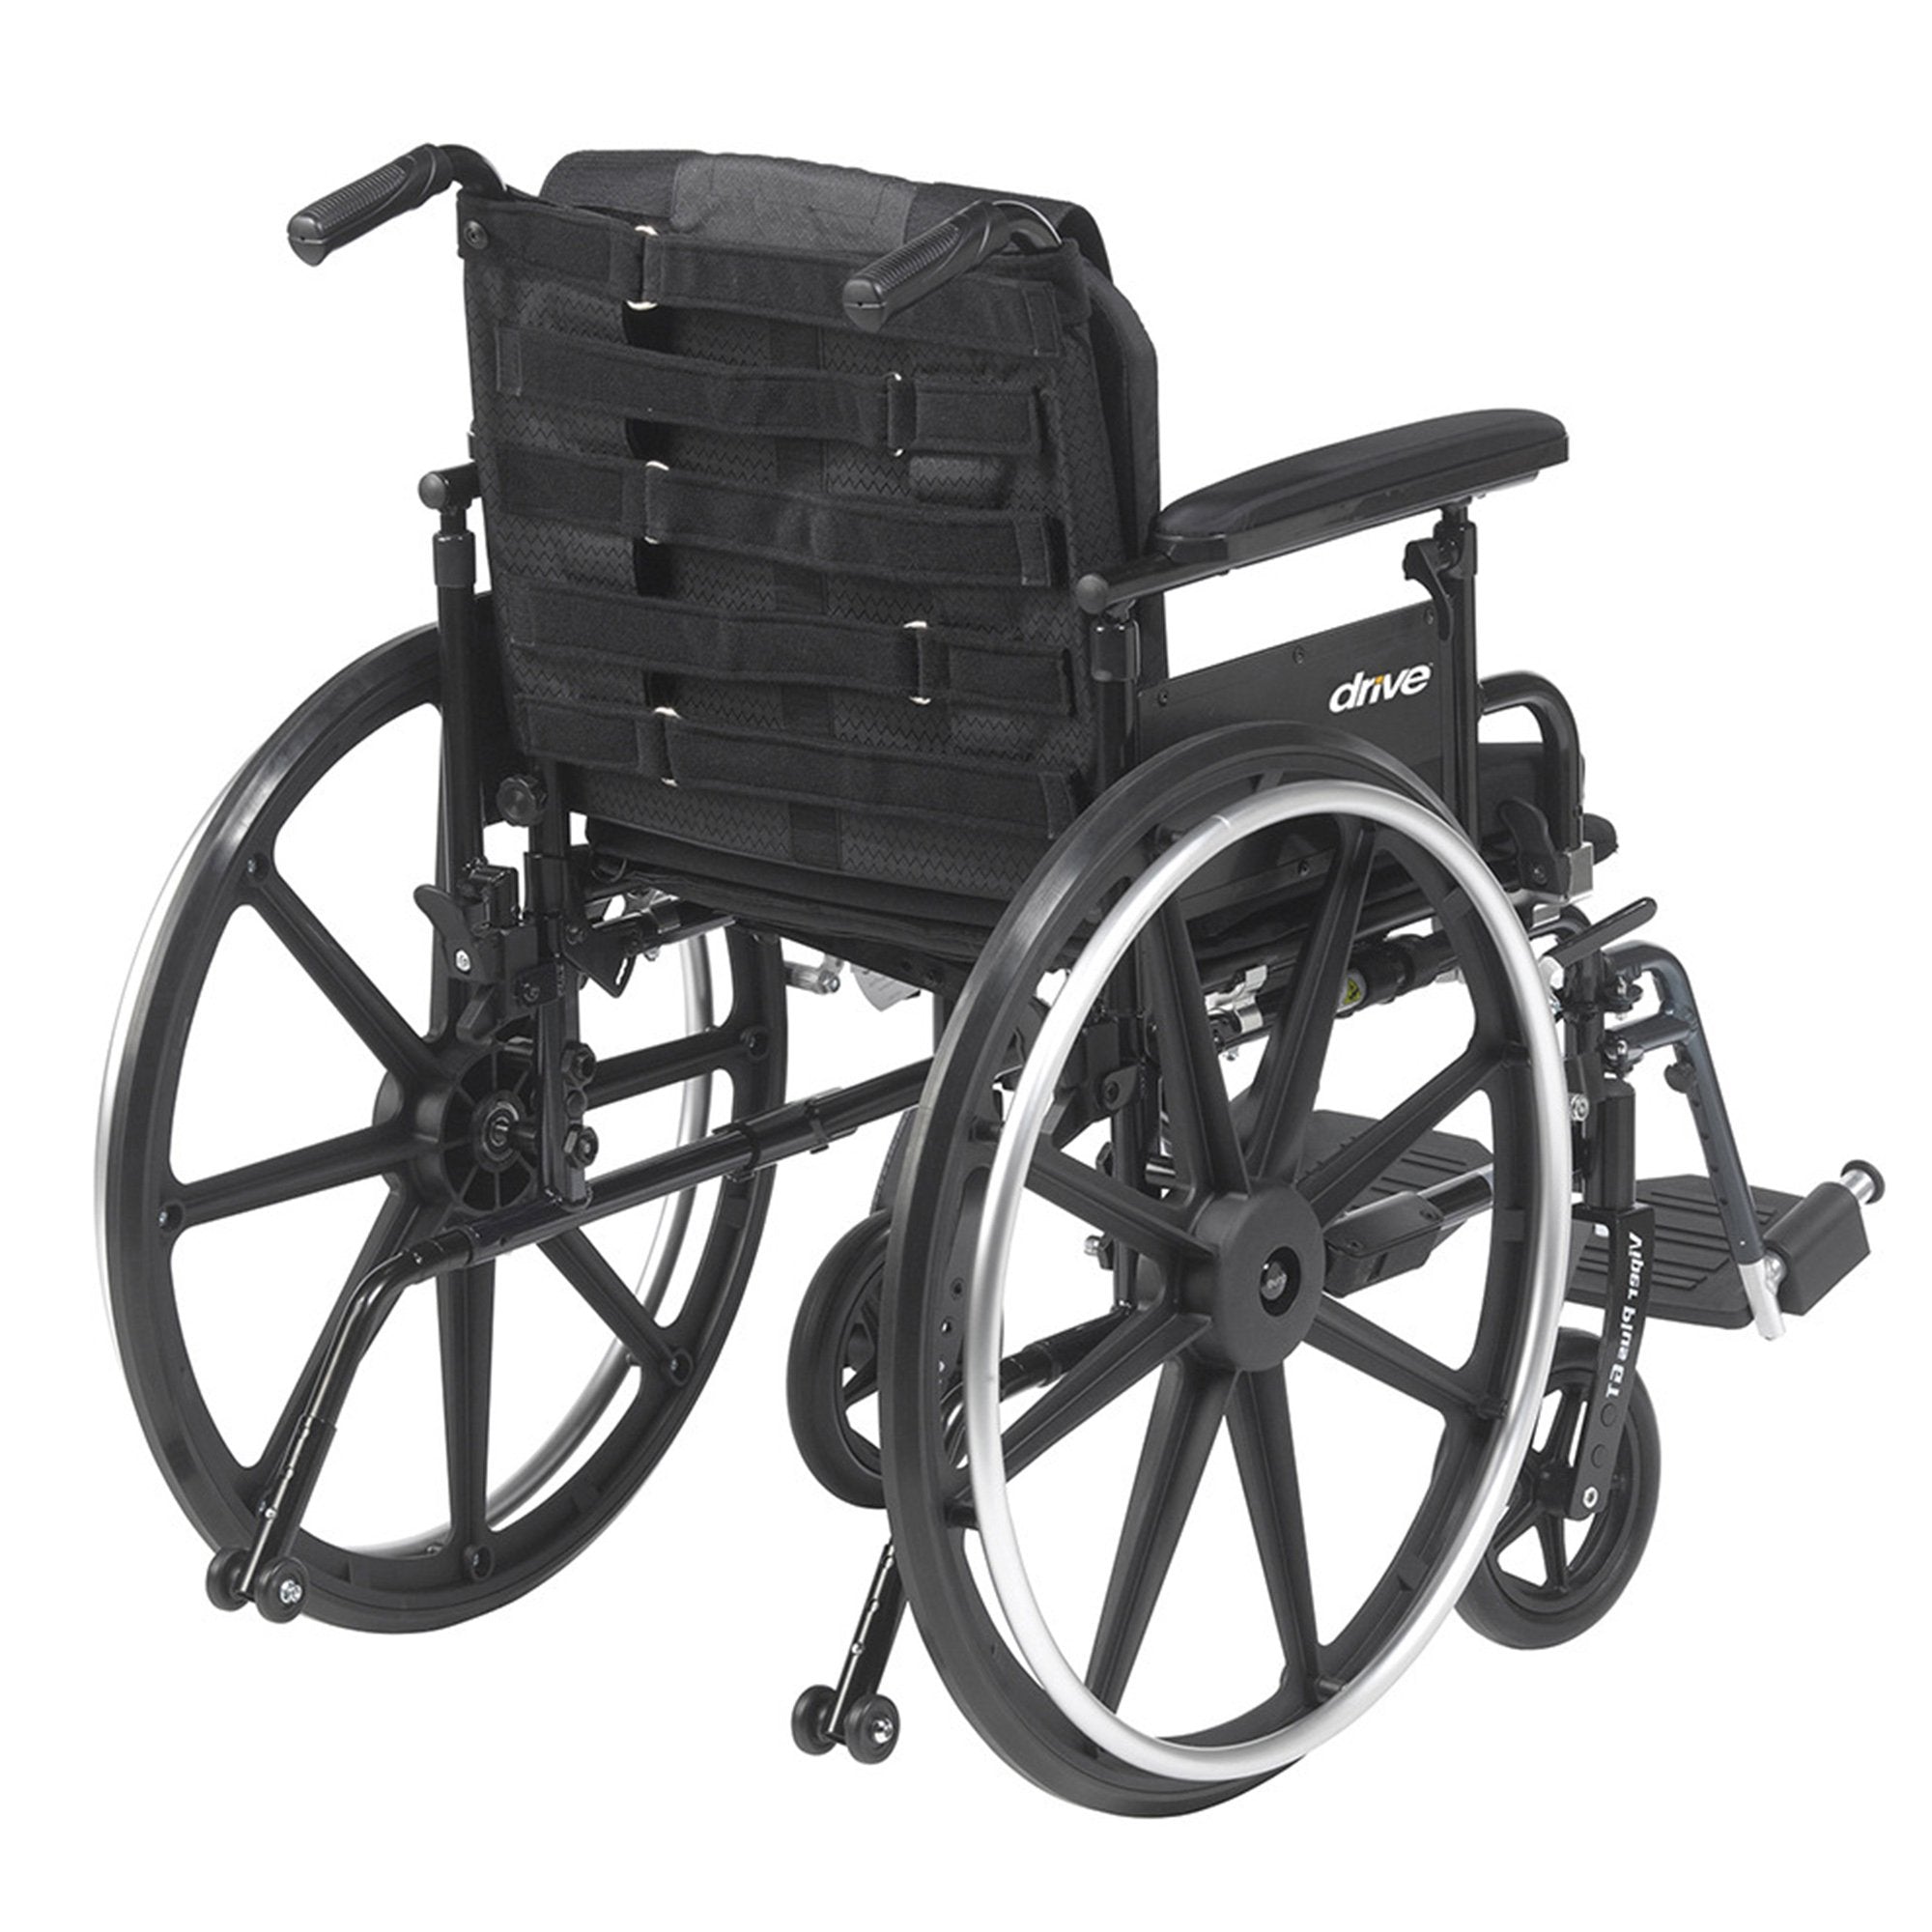 Adjustable Tension Back Cushion drive™ For Wheelchair